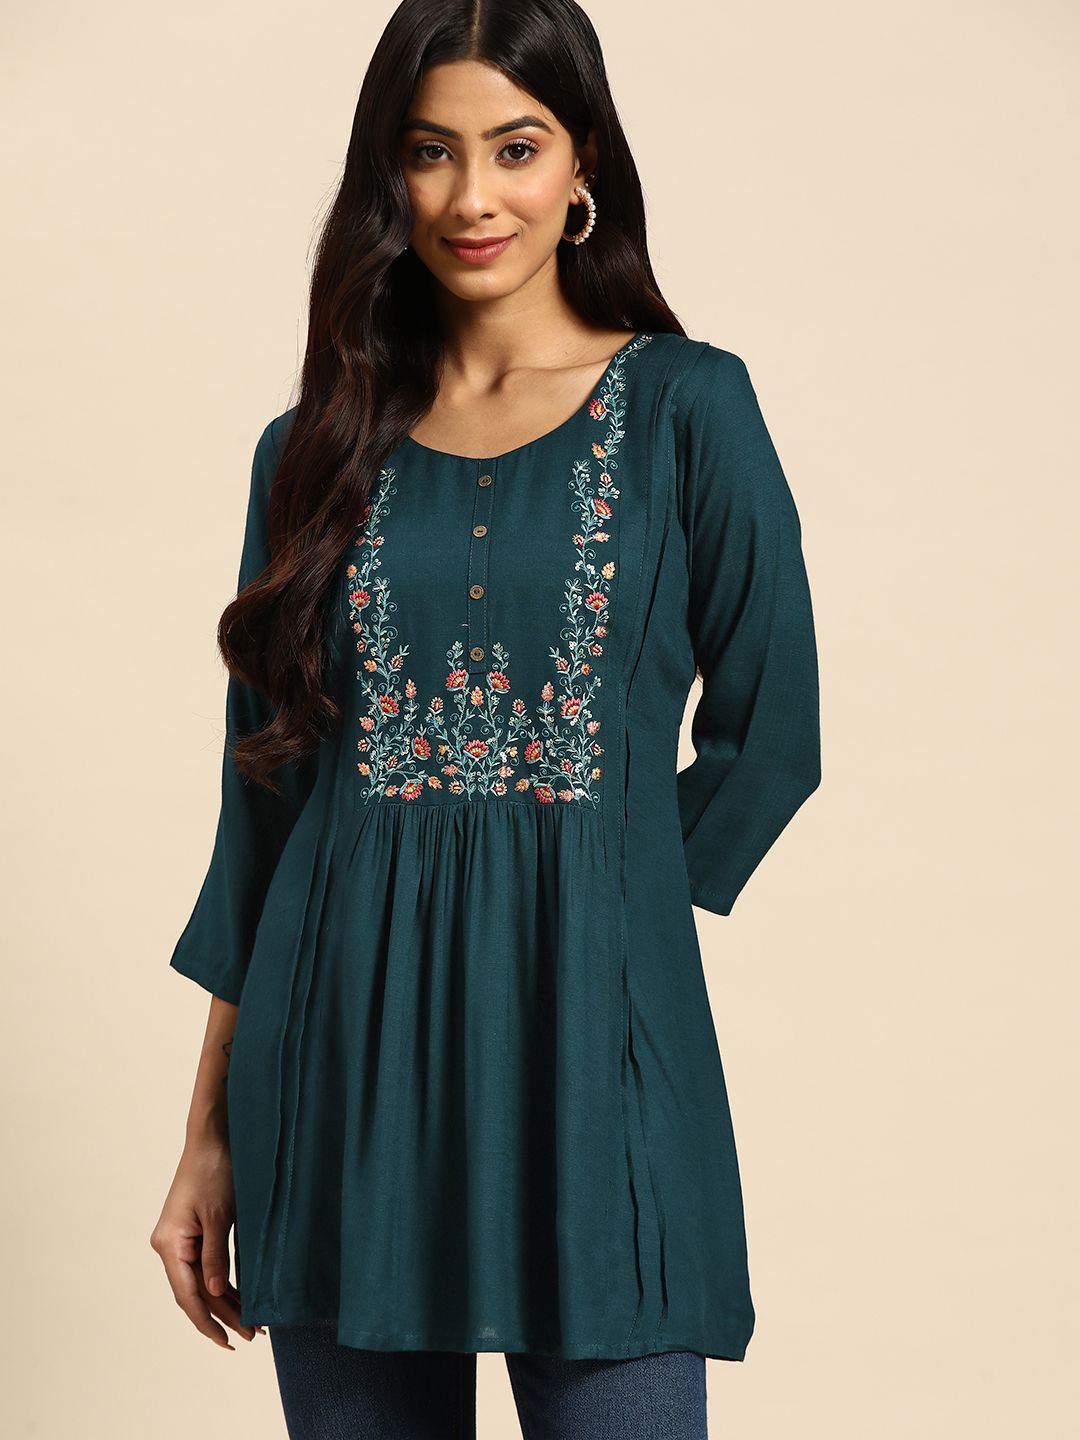 all about you Teal Floral Embroidered Longline Top Price in India